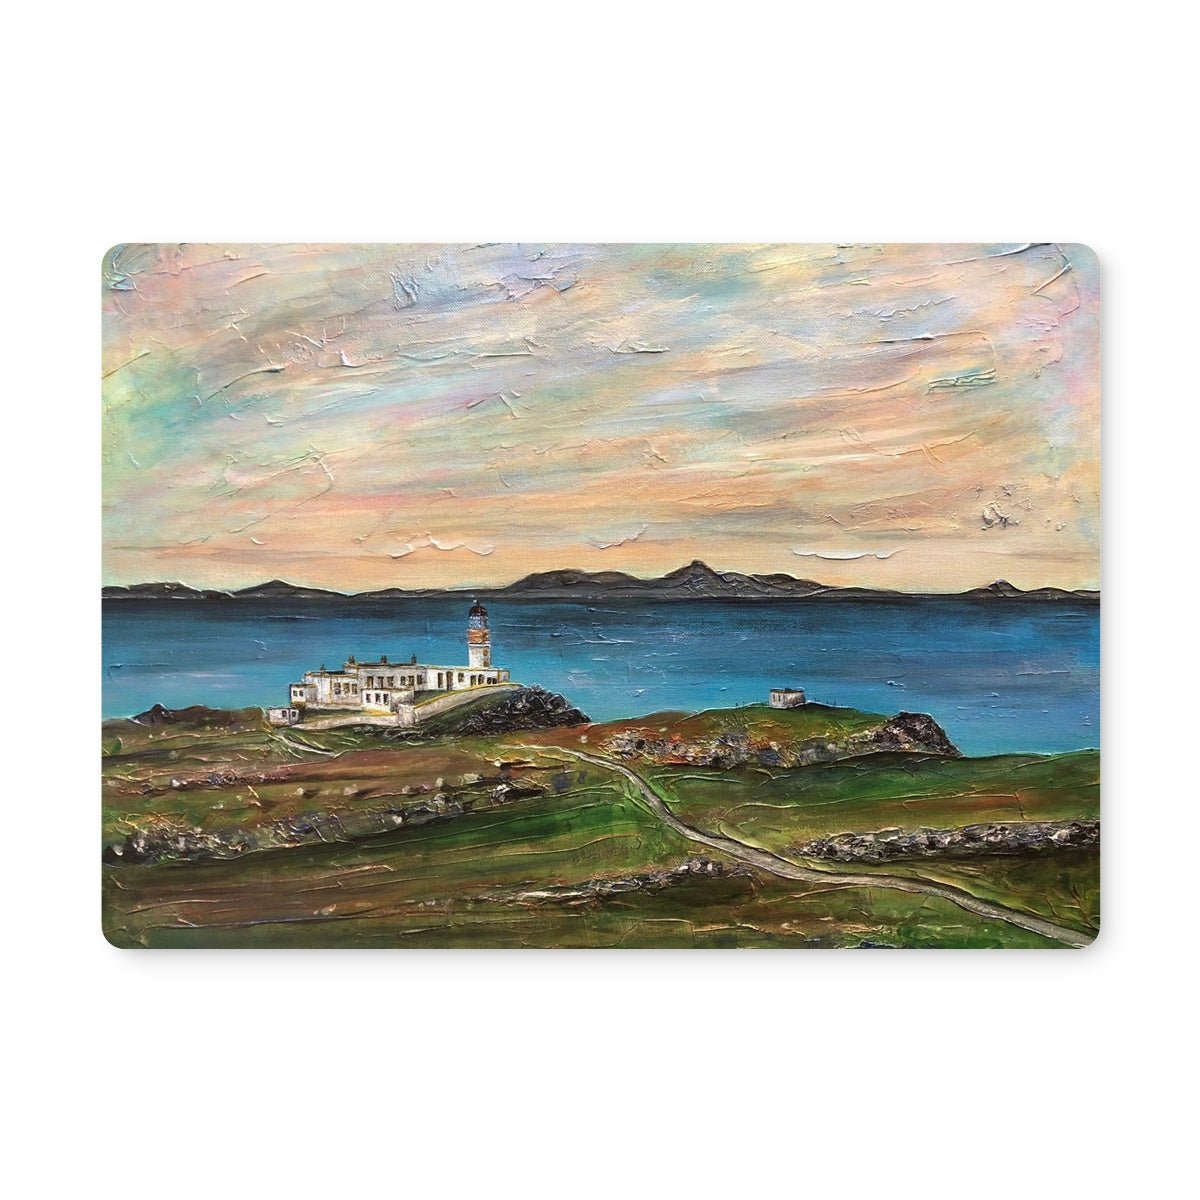 Neist Point Skye Art Gifts Placemat-Placemats-Skye Art Gallery-4 Placemats-Paintings, Prints, Homeware, Art Gifts From Scotland By Scottish Artist Kevin Hunter